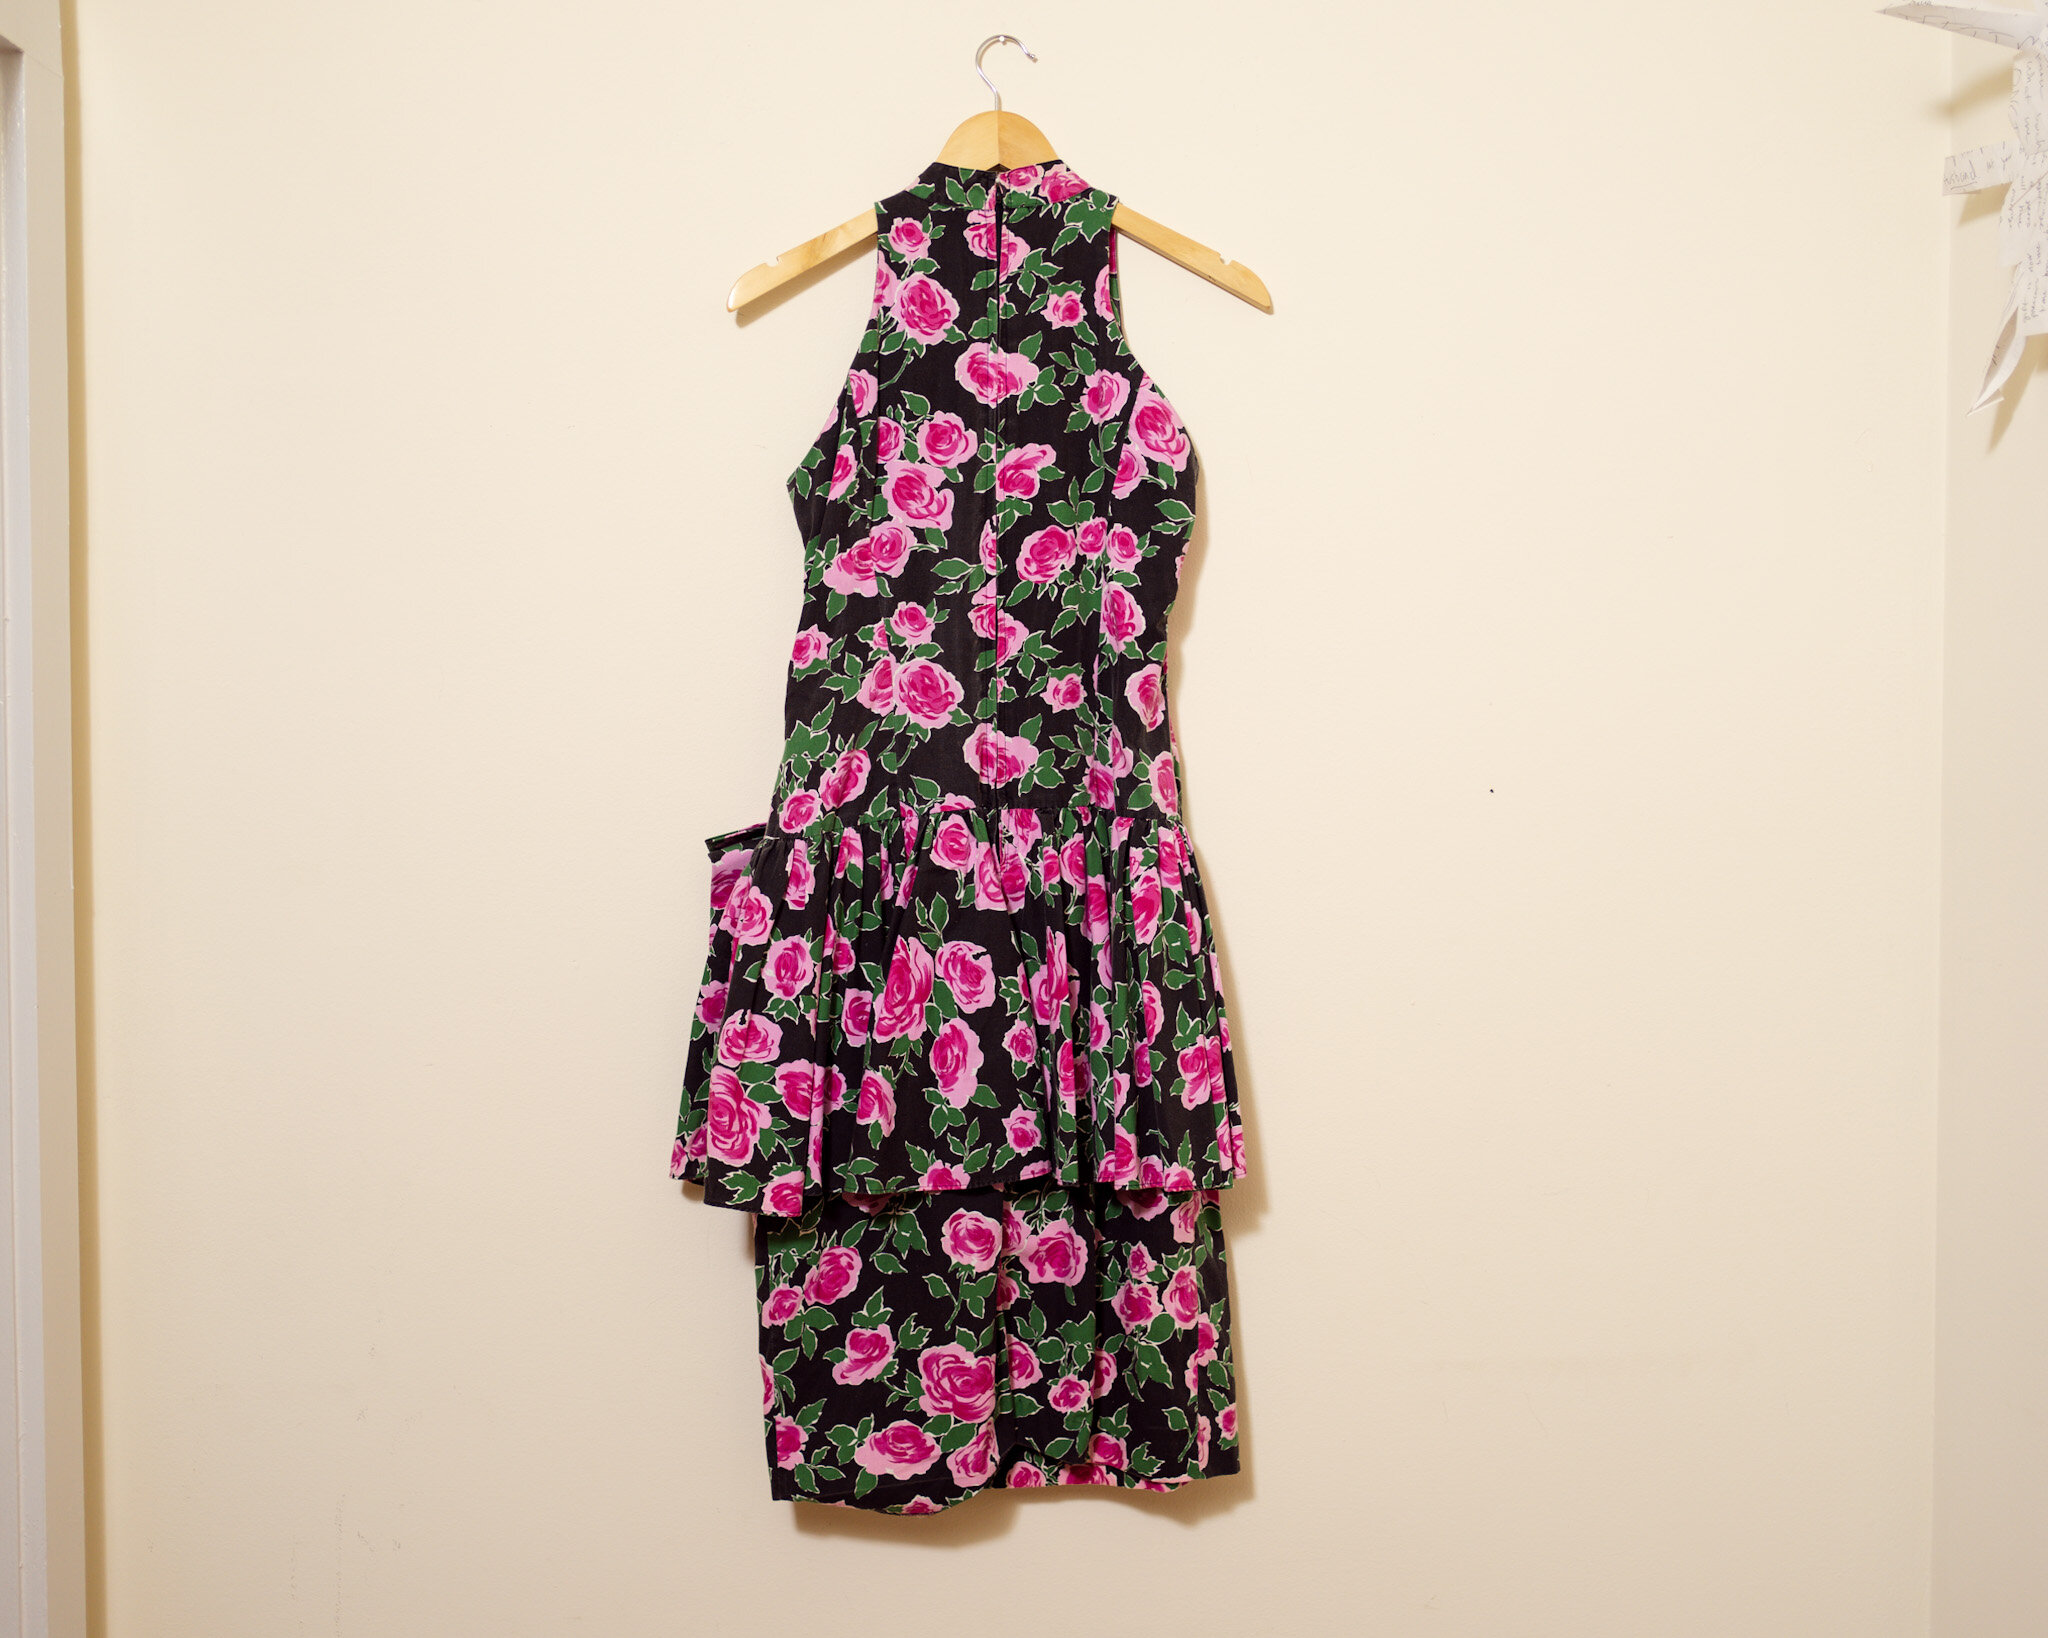 1980s Halter Peplum Ruffle Dress With Pink Roses and Oversized Bow